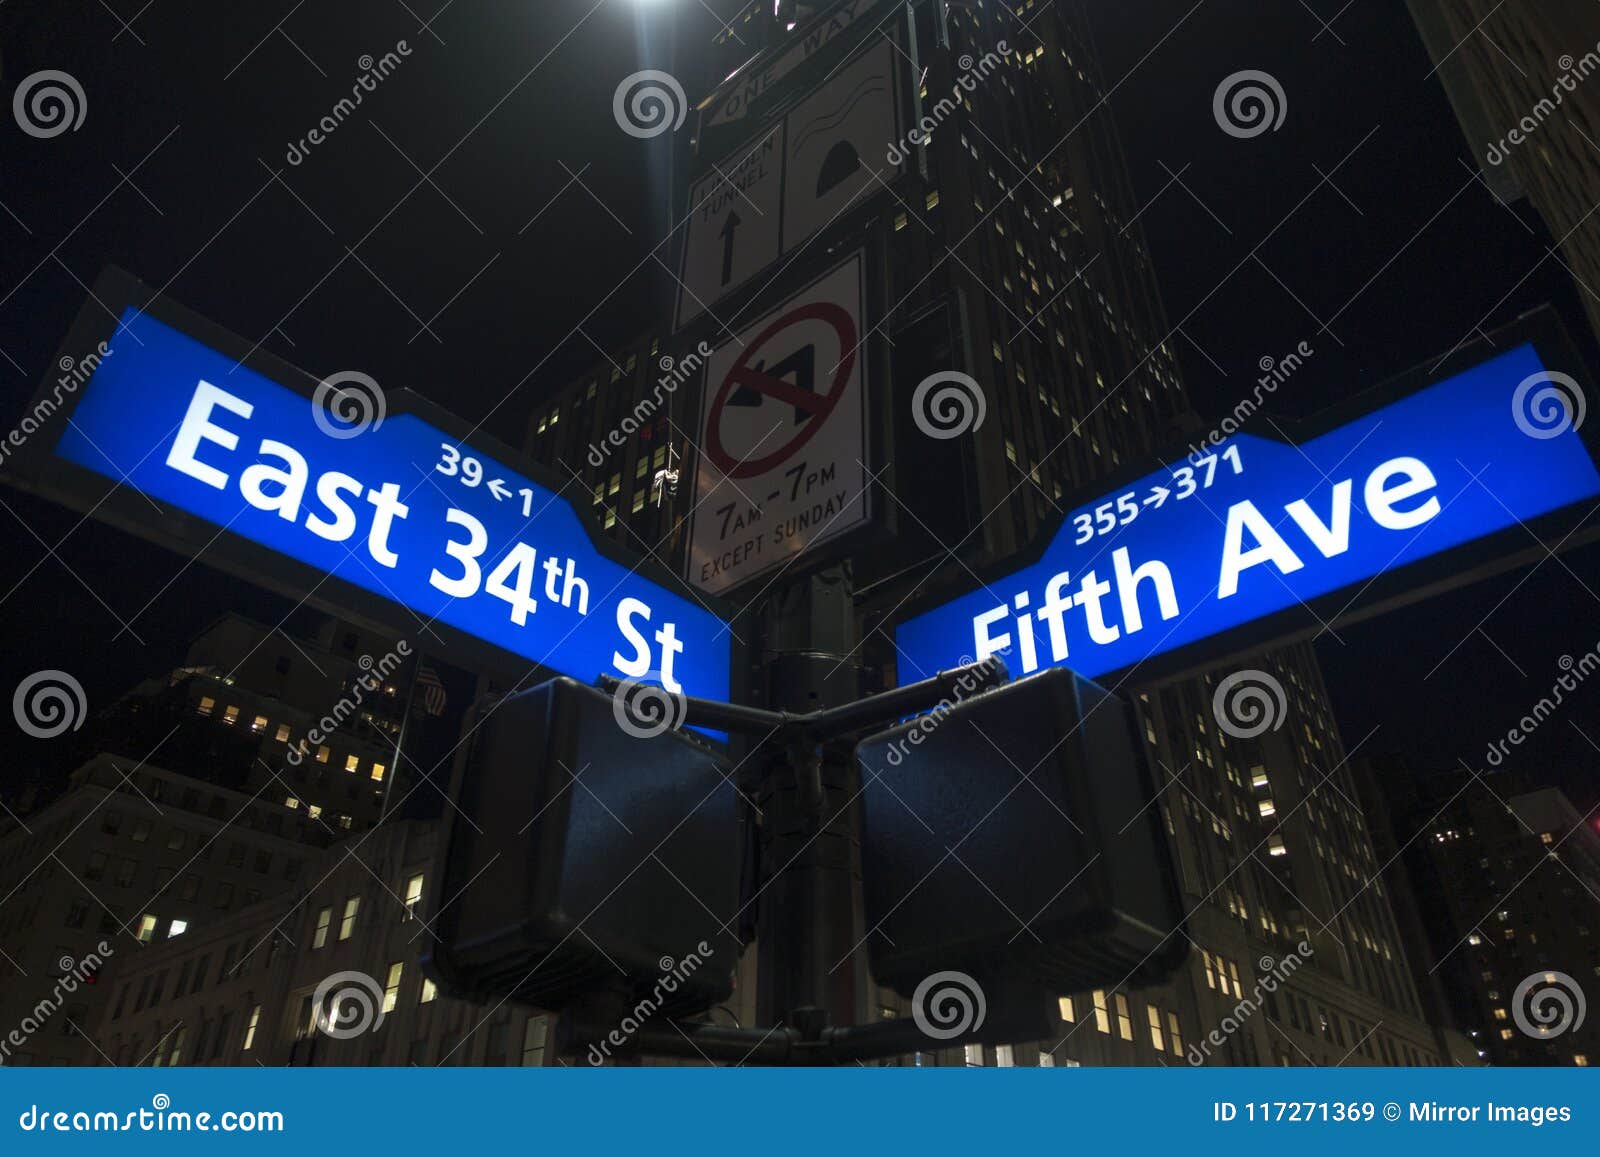 Manhattan Lighted Street Signs Blue and White Stock Image - Image of ...